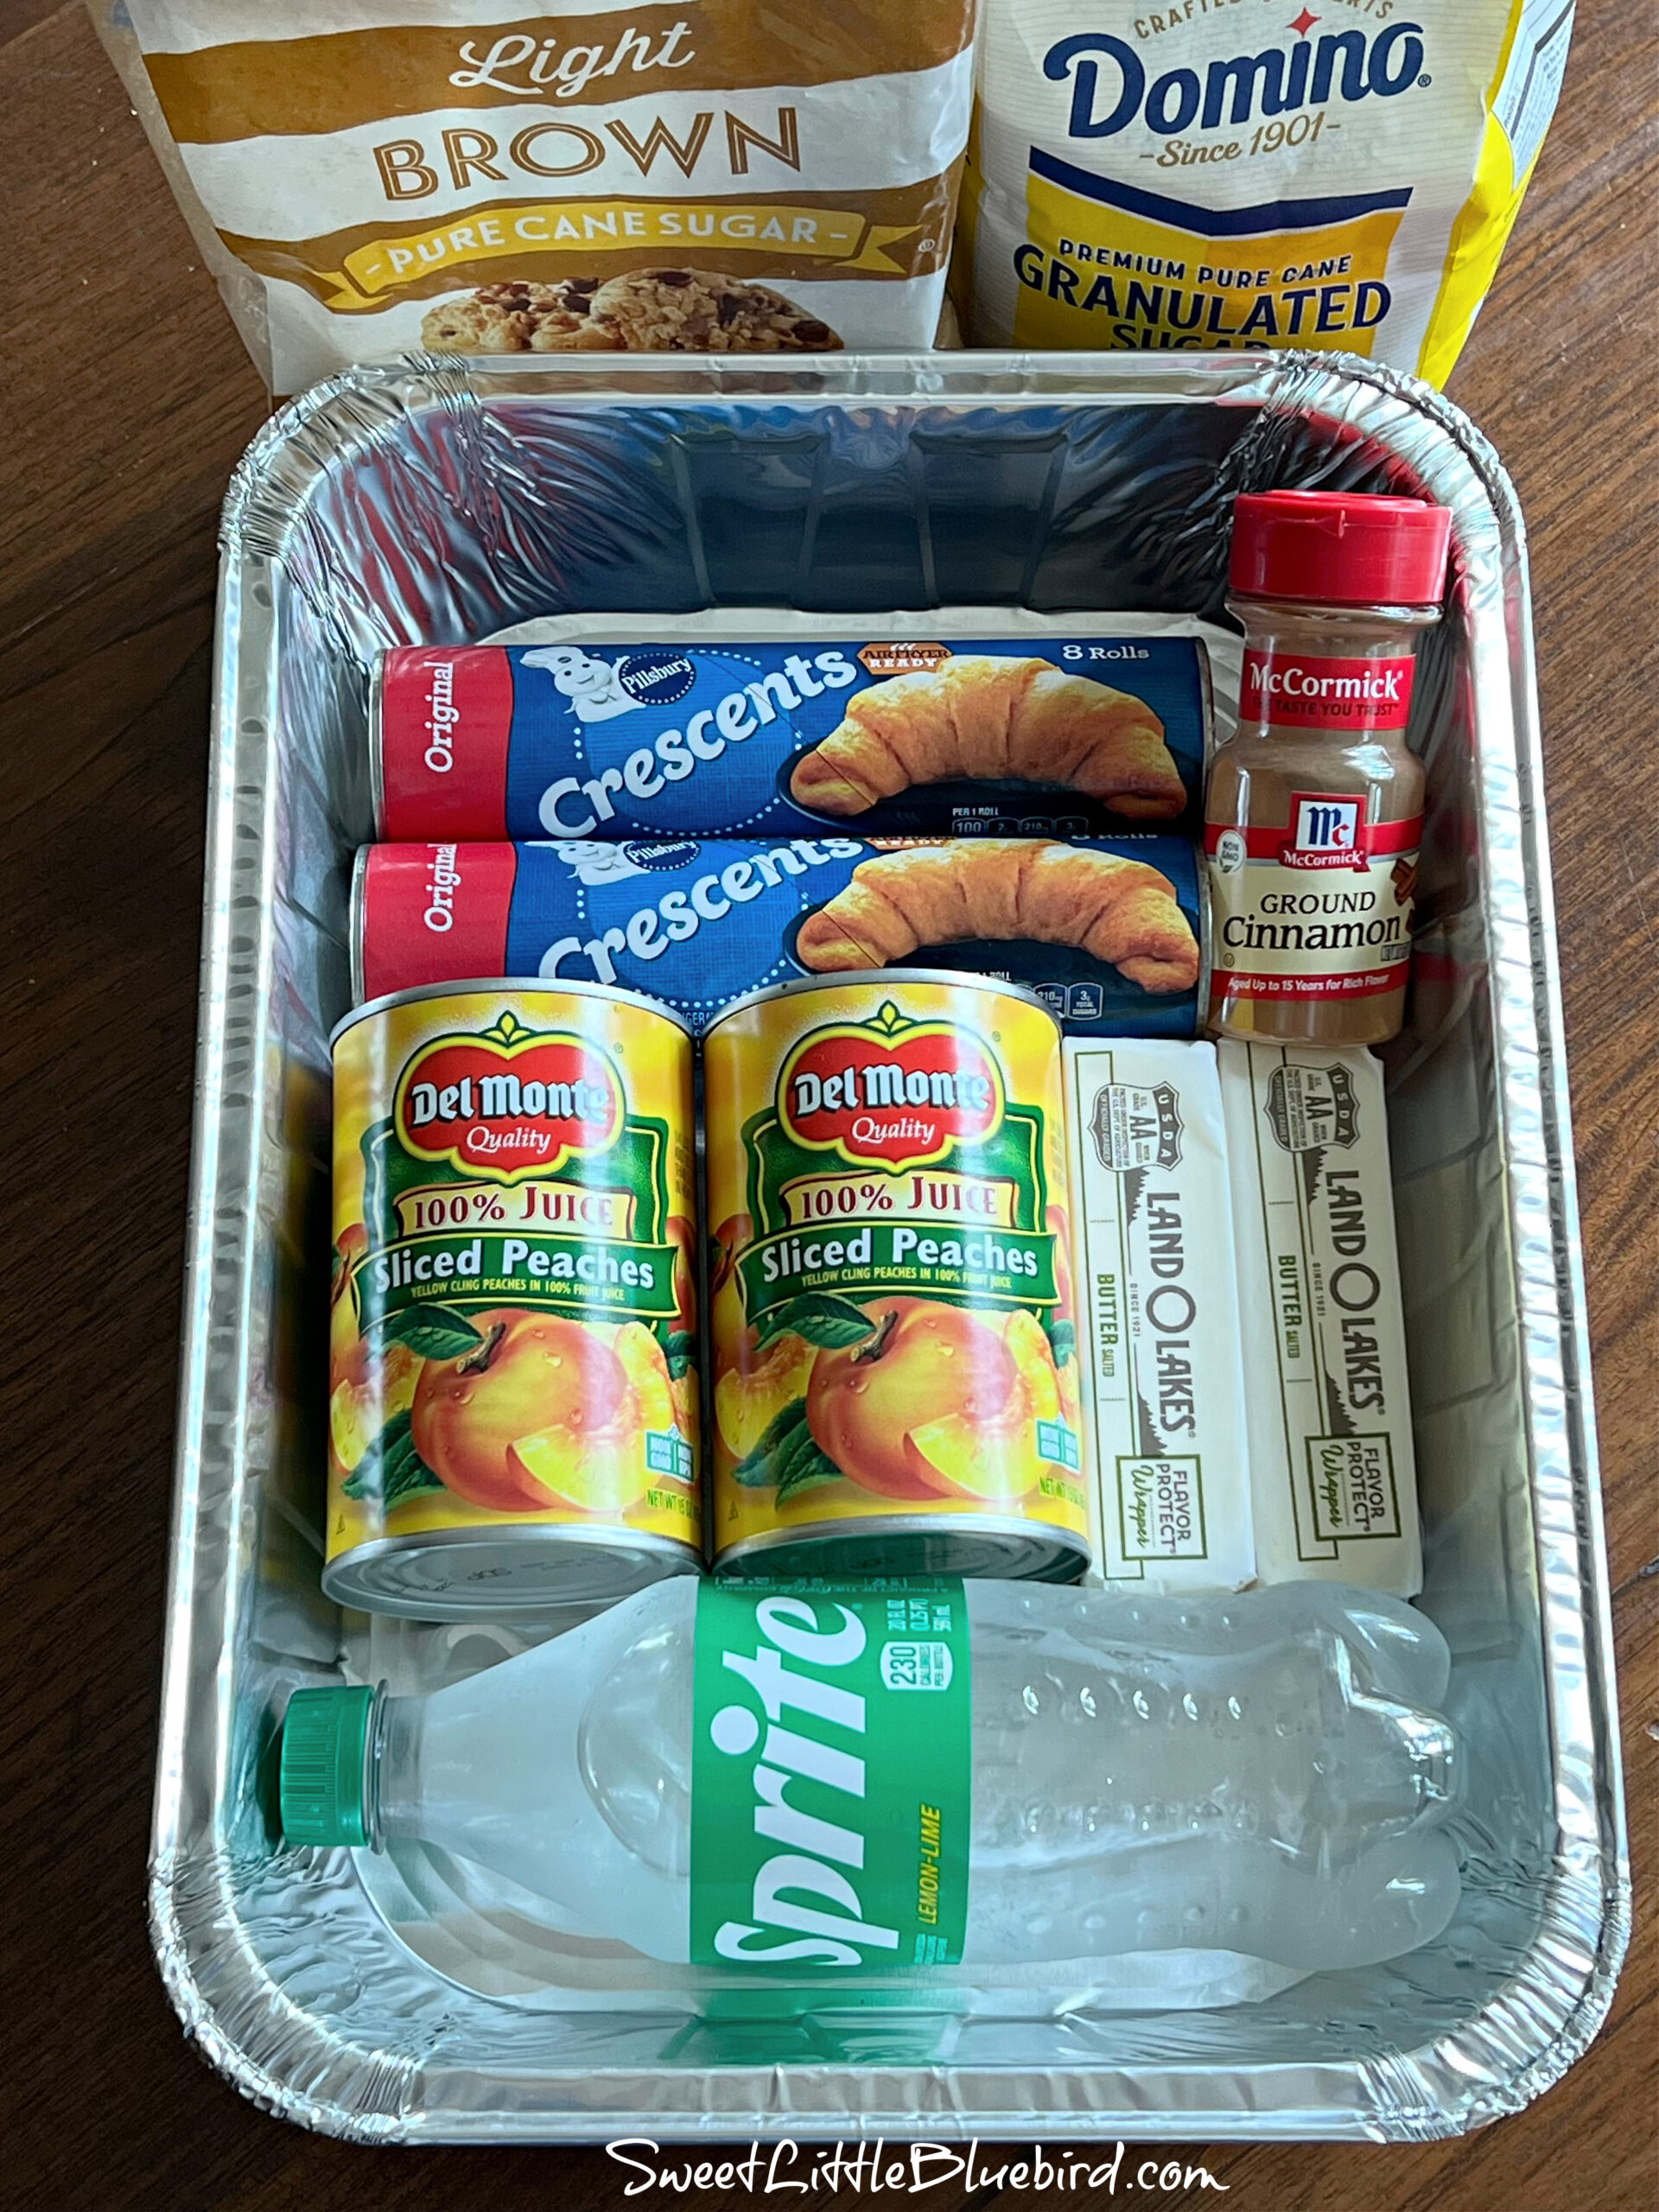 This photo shows the ingredients needed to make the dumplings inside a disposable 9x13 baking aluminum pan (cans of peaches, crescent rolls, butter, cinnamon and a bottle of Sprite). Next to the pan is a bag of granulated sugar and a bag of brown sugar.